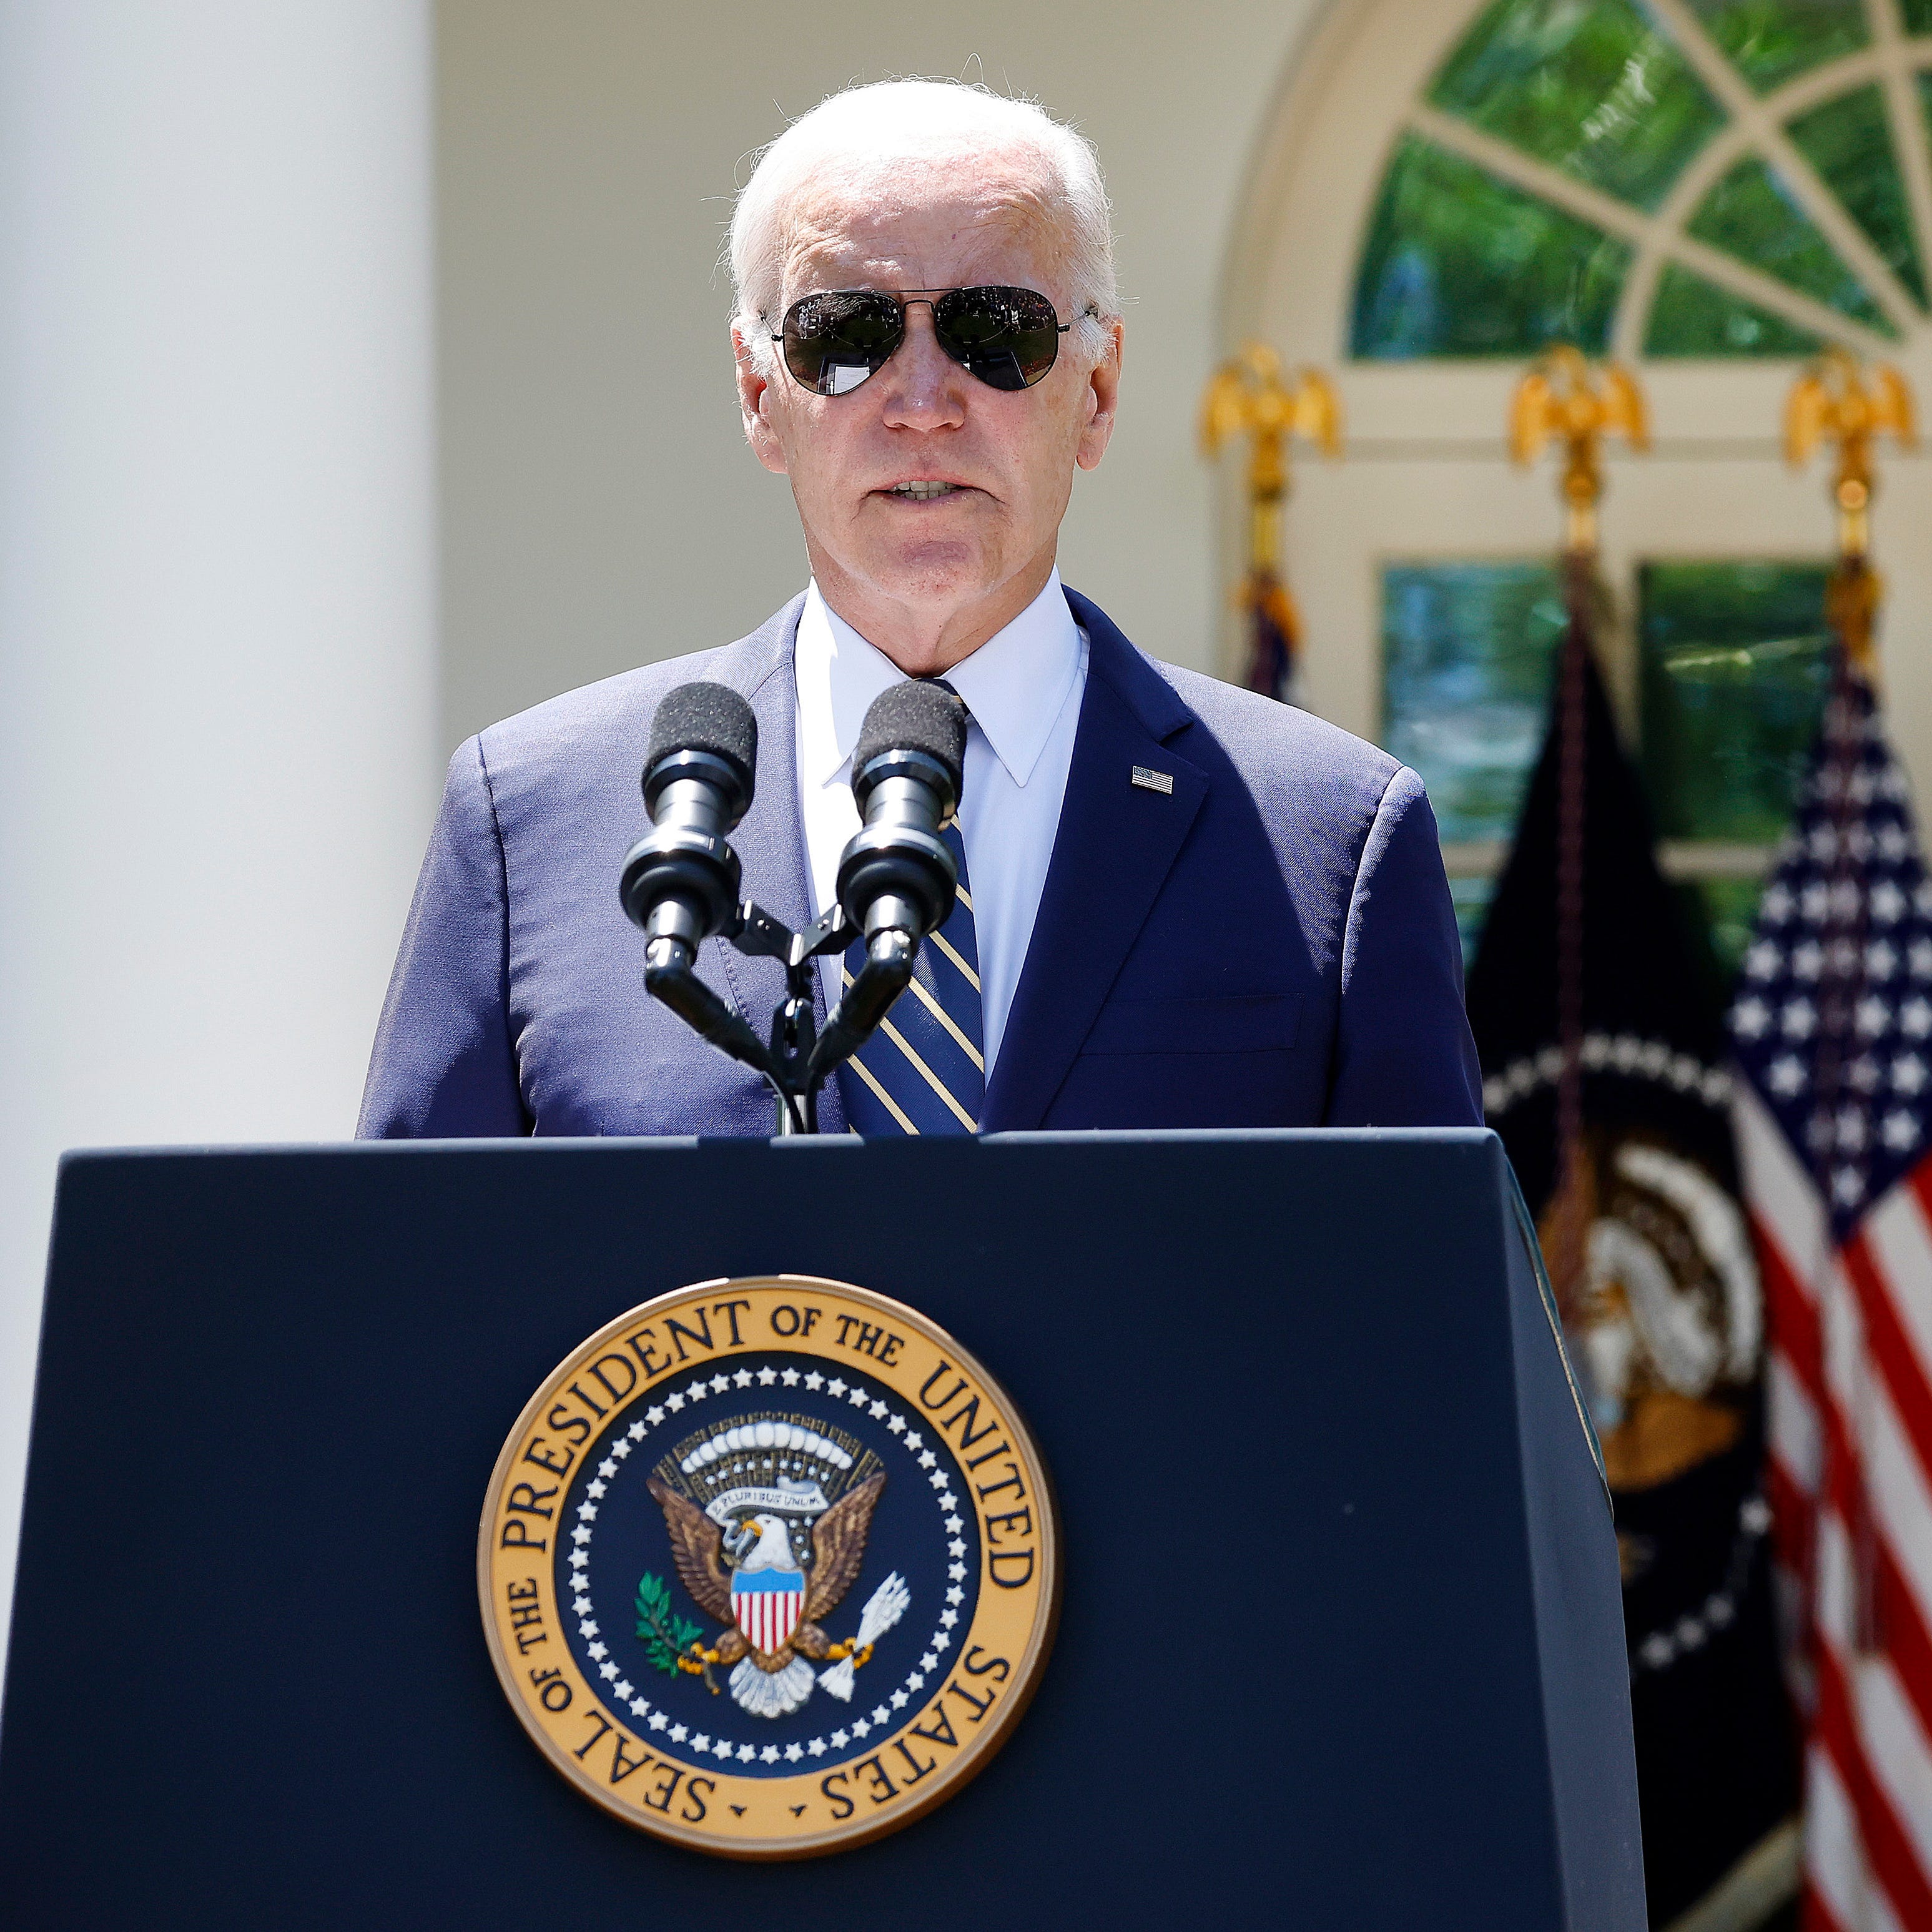 U.S. President Joe Biden announces his intent to nominate Gen. Charles Q. Brown, Jr. to serve as the next Chairman of the Joint Chiefs of Staff during an event in the Rose Garden of the White House May 25, 2023 in Washington, DC.